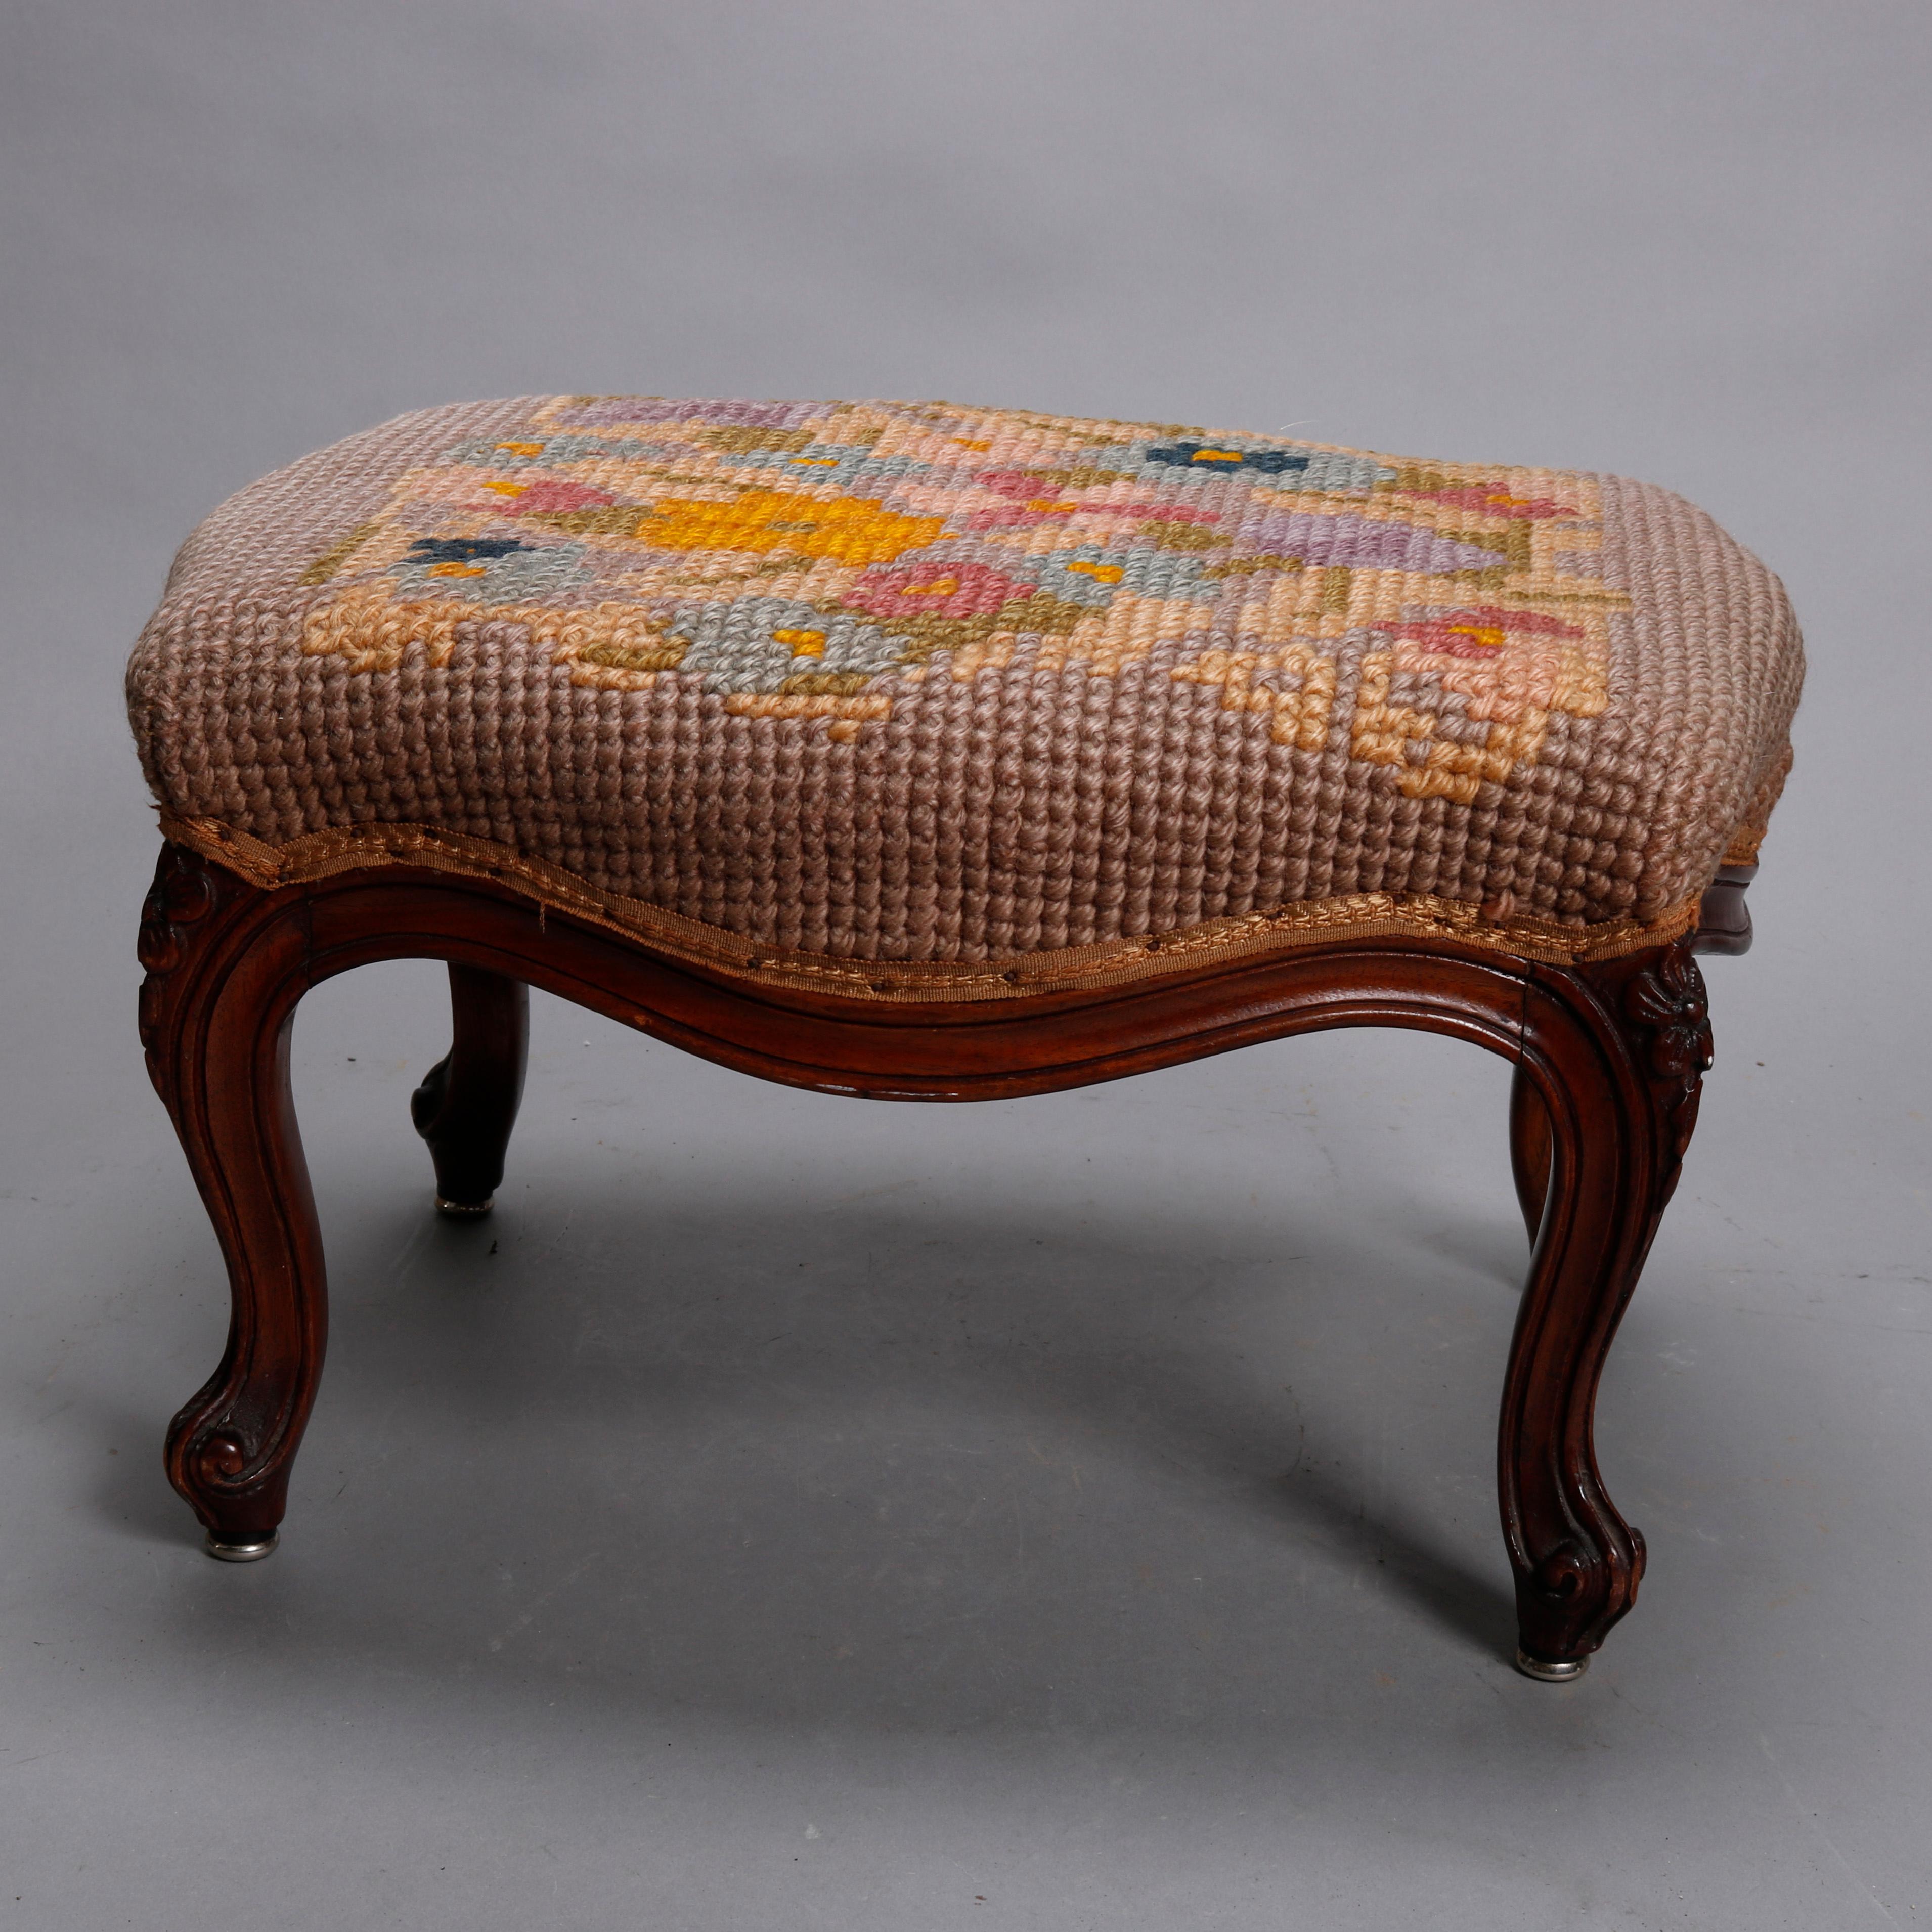 An antique French Louis XV style footstool offers floral needlepoint seat over shaped carved walnut frame, raised on cabriole legs terminating in scroll feet, circa 1900.

Measures - 11.5